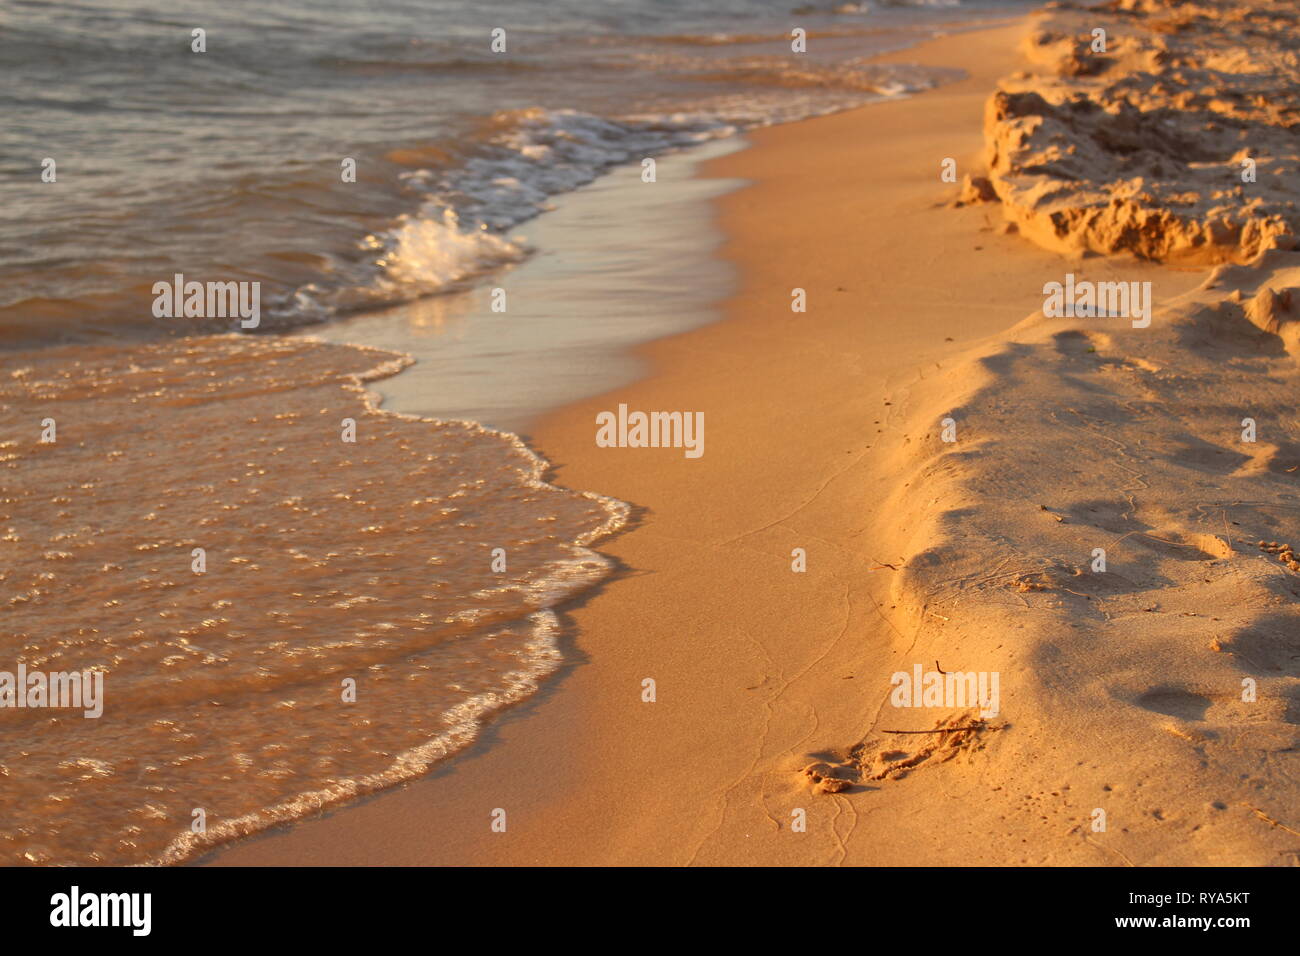 Romantic walks along the beach at the end of the day, hand in hand, are a good way to unwind. Stock Photo